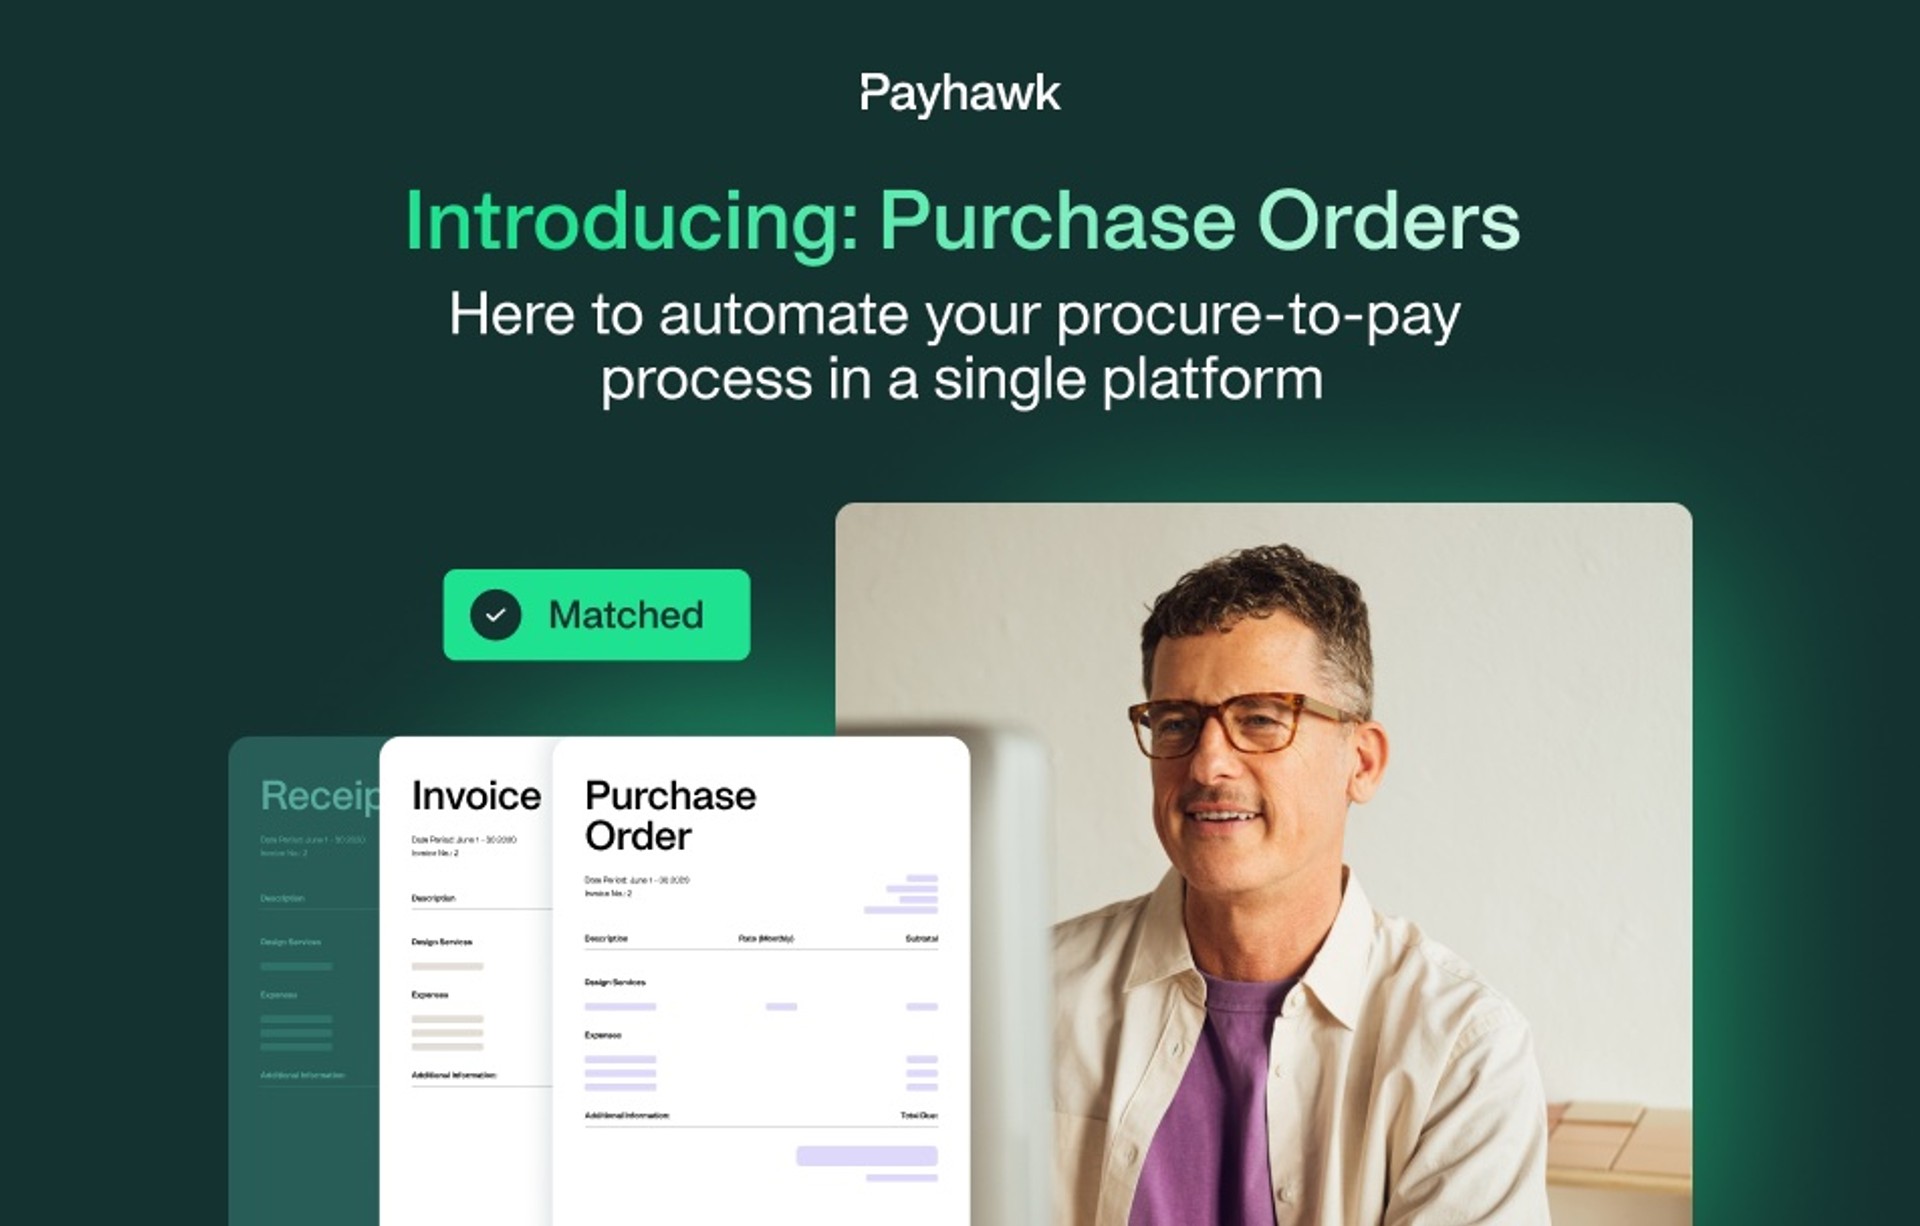 https://storage.googleapis.com/payhawk-website/images/000/004/874/lead/purchase-orders-from-payhawk.jpg